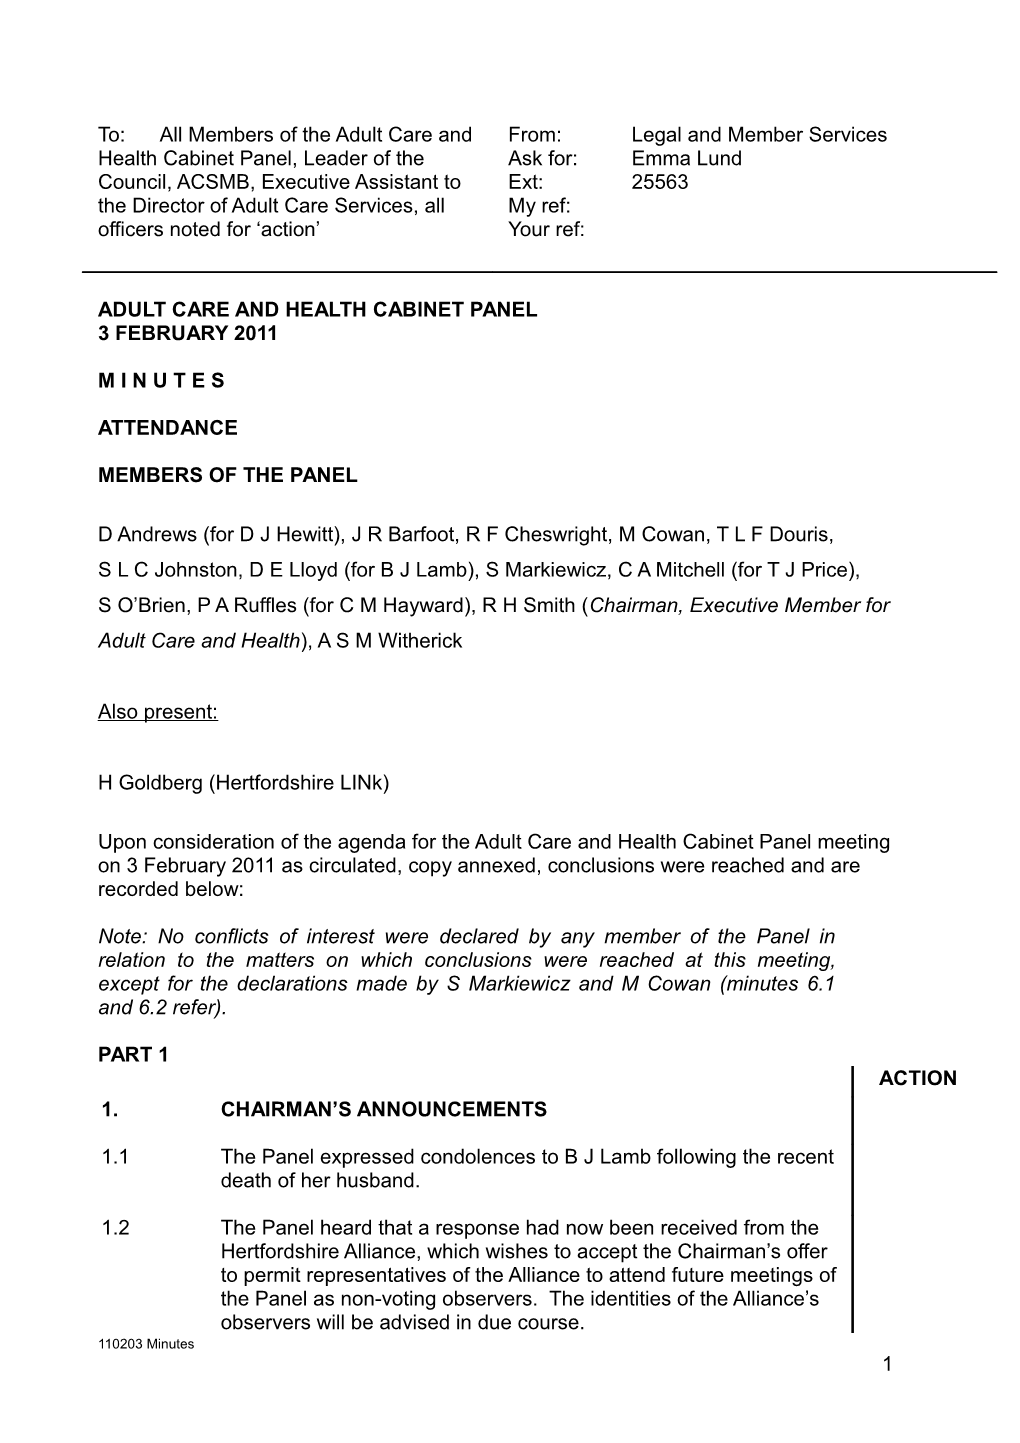 Minutes of a Meeting of the Adult Care and Health Cabinet Panel Held on Thursday 3 February